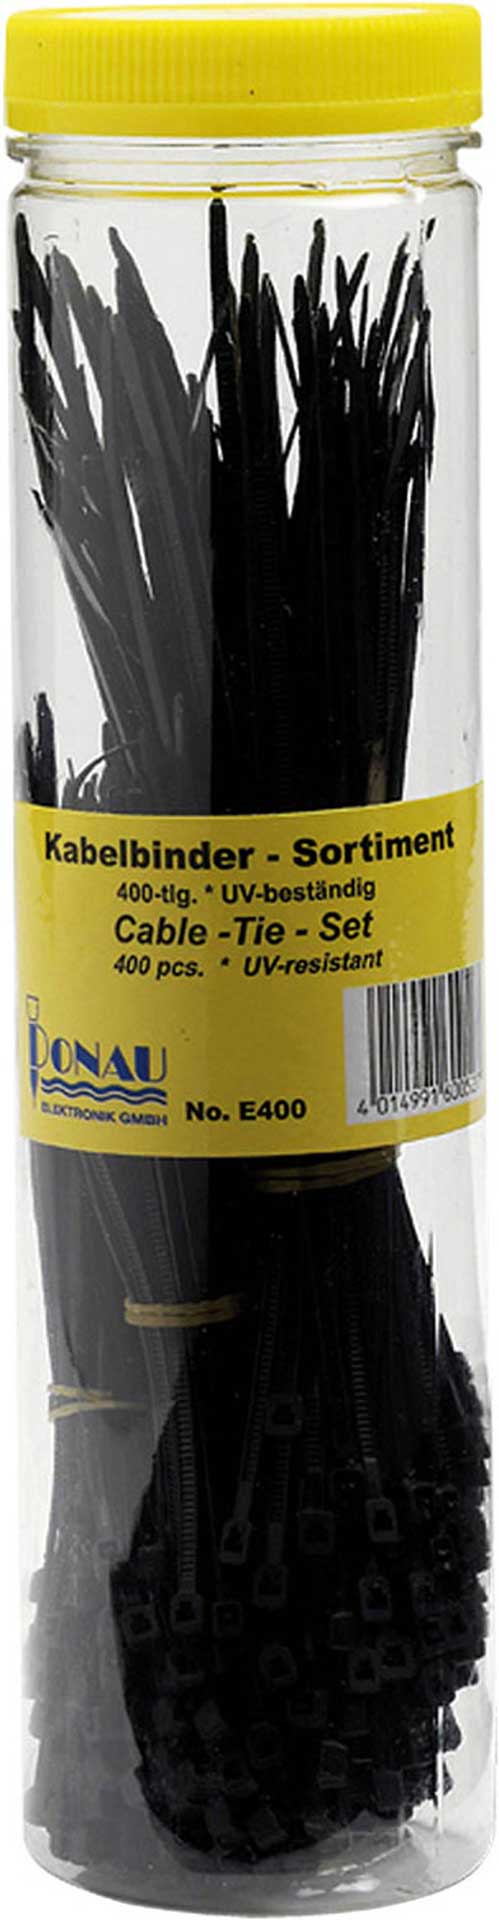 MODELLBAU LINDINGER CABLE STRAPS ASSORTMENT 400 PIECES BLACK WITH TWO TYPES ( 100/2,4MM, 140/2,4MM )